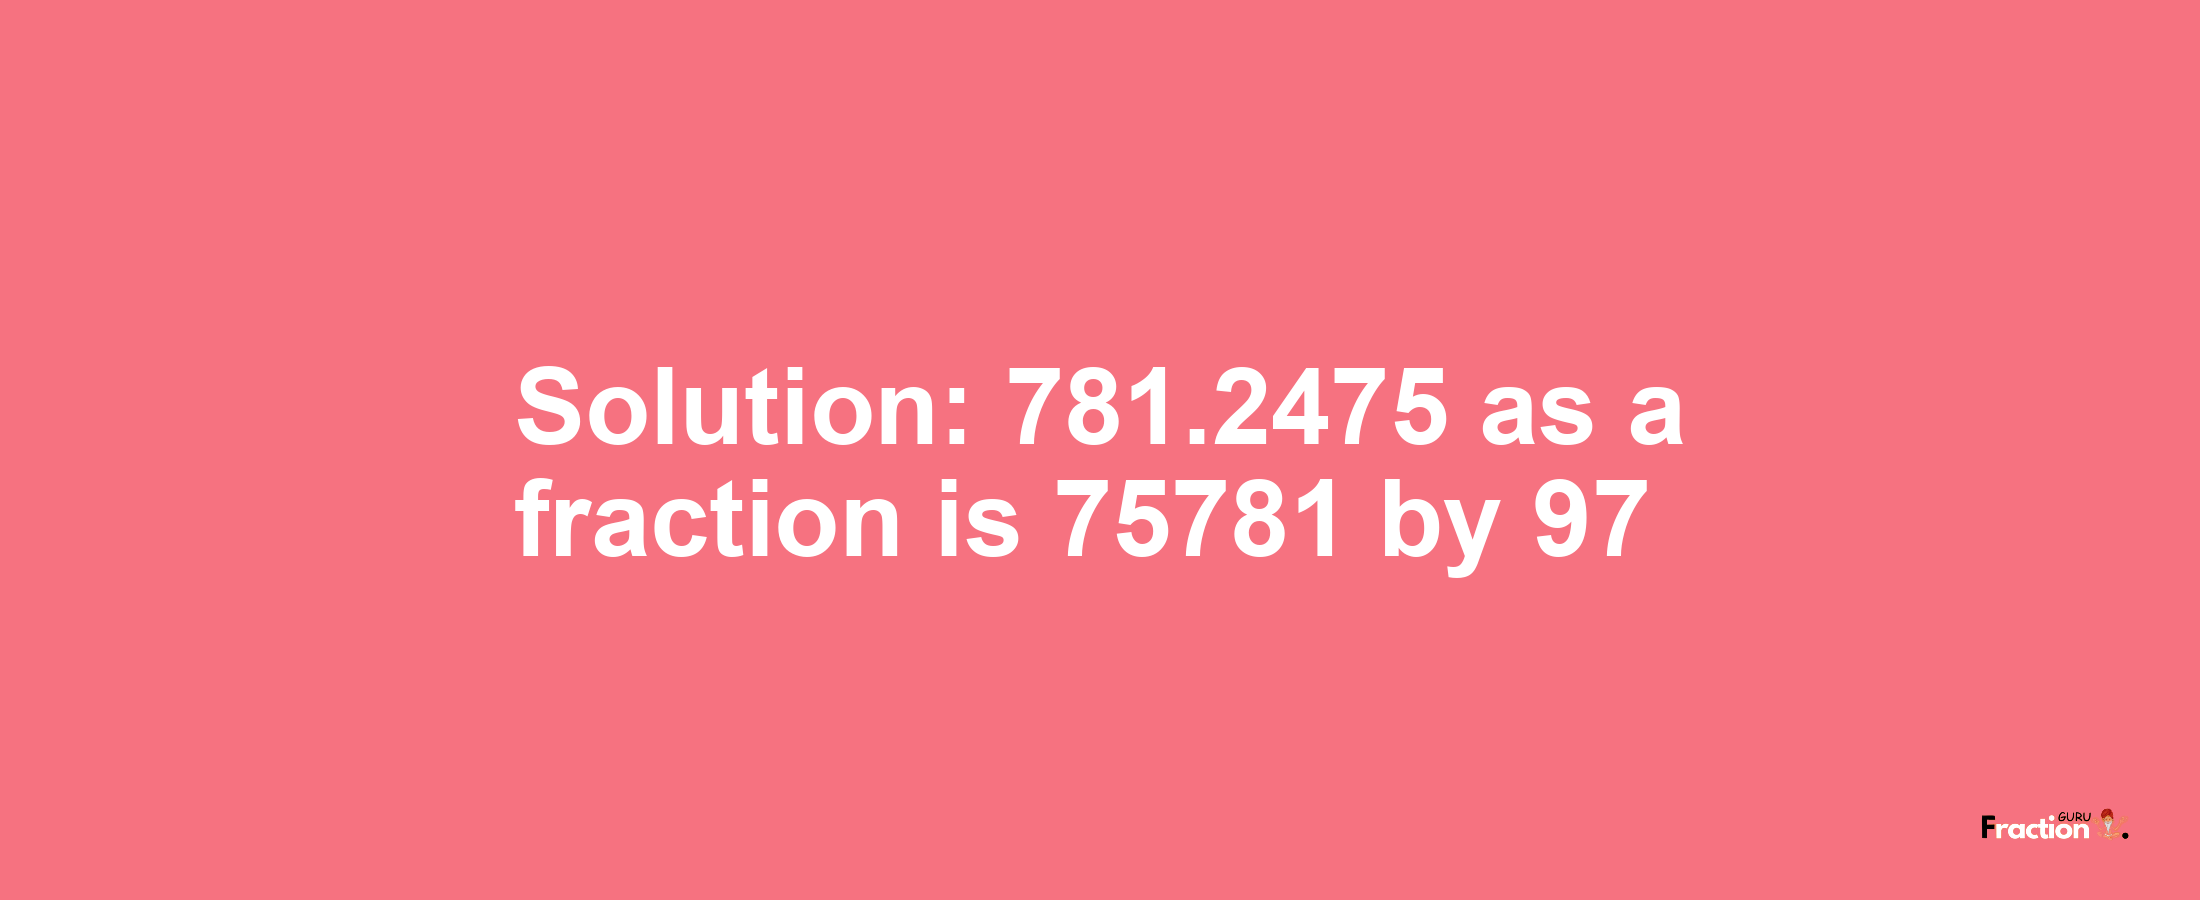 Solution:781.2475 as a fraction is 75781/97